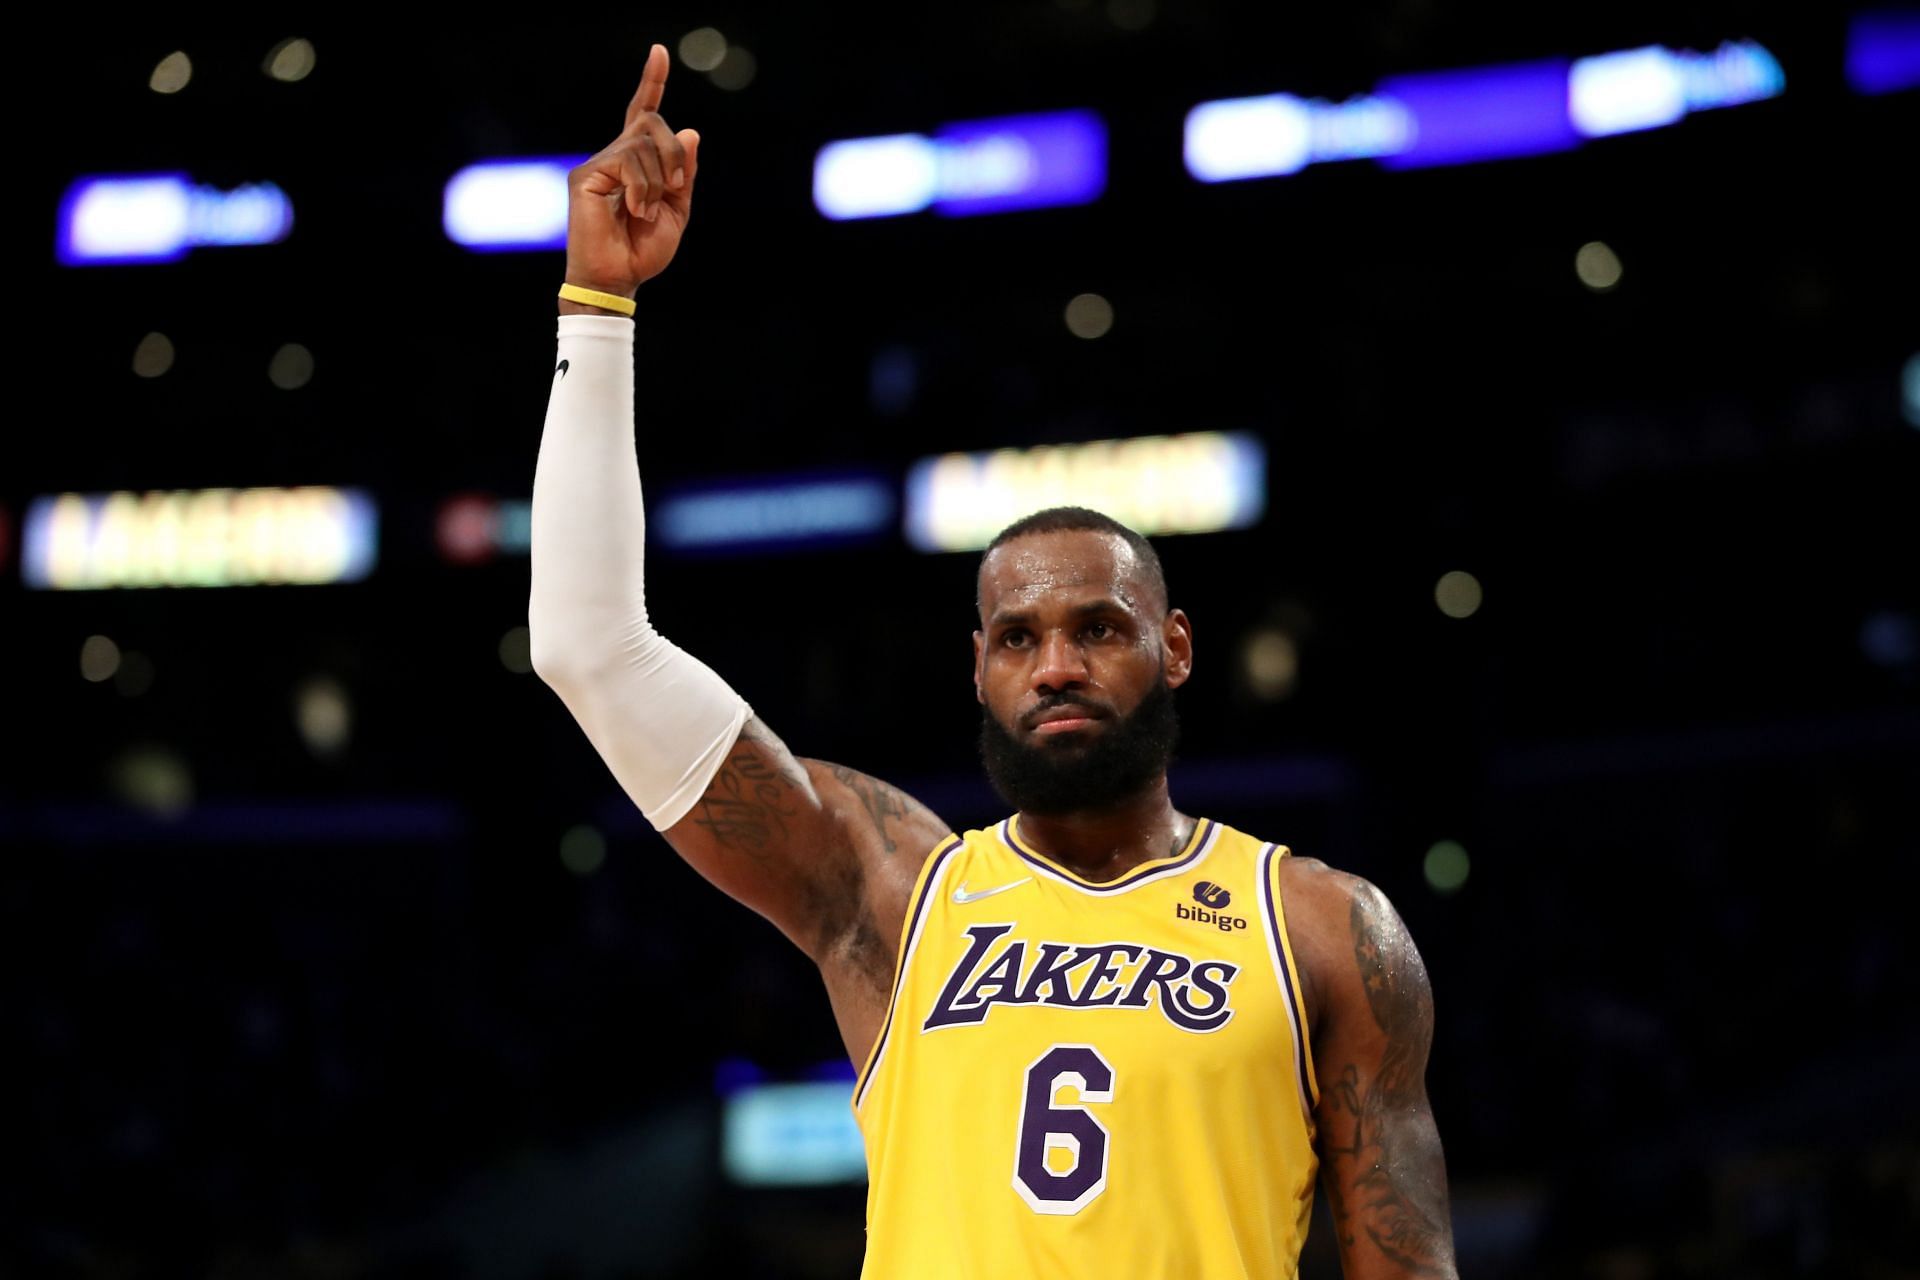 LeBron James #6 of the Los Angeles Lakers.